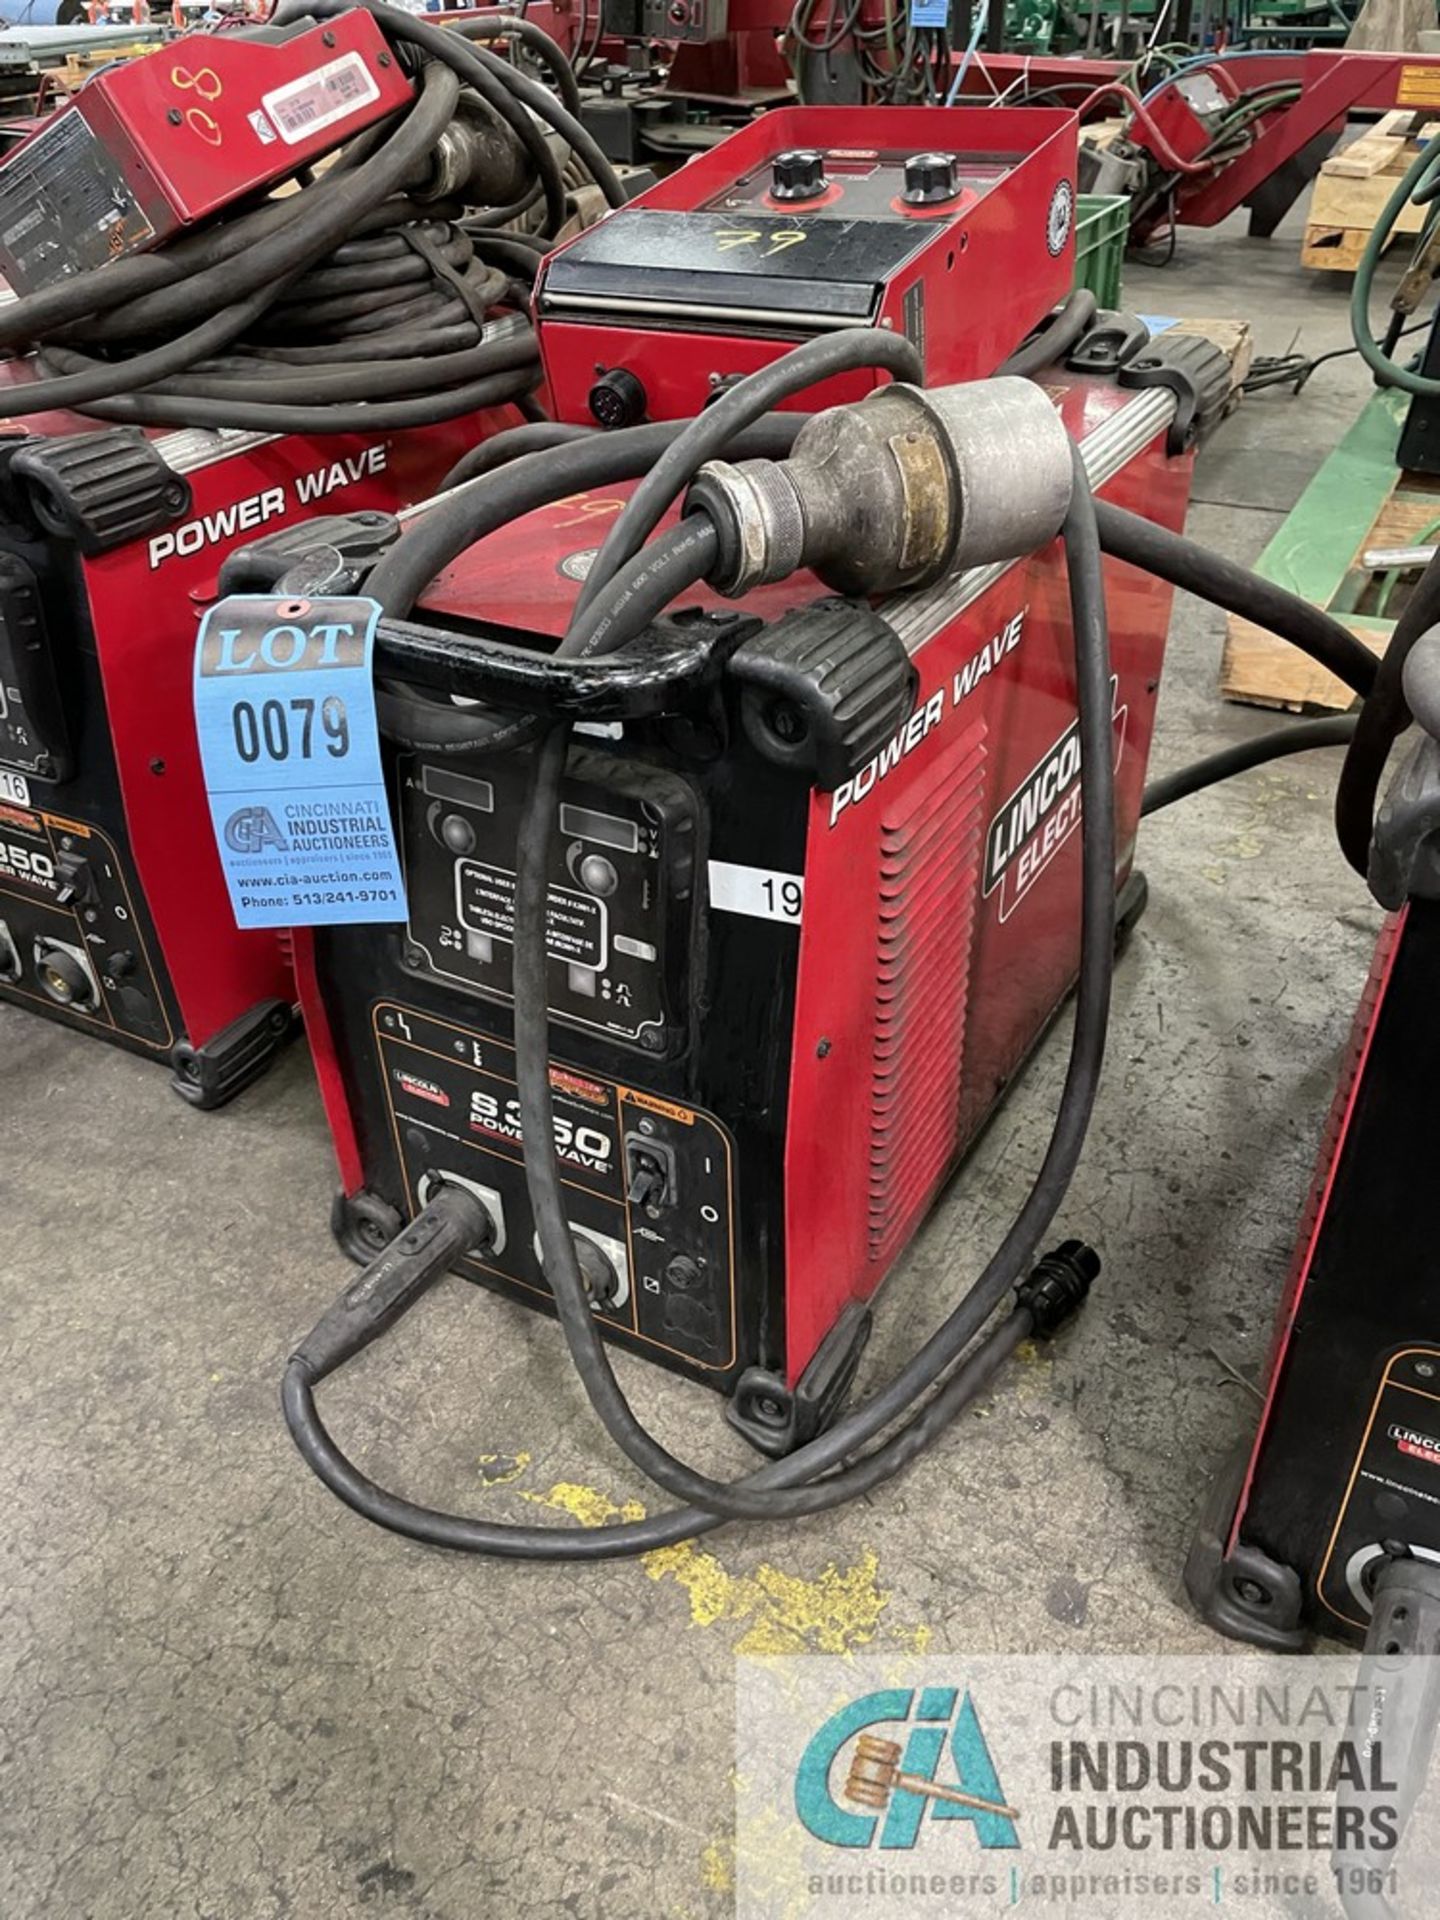 350 AMP LINCOLN S350 POWER WAVE ADVANCED PROCESS WELDER S/N N/A, WITH POWER FEED CONTROLLER